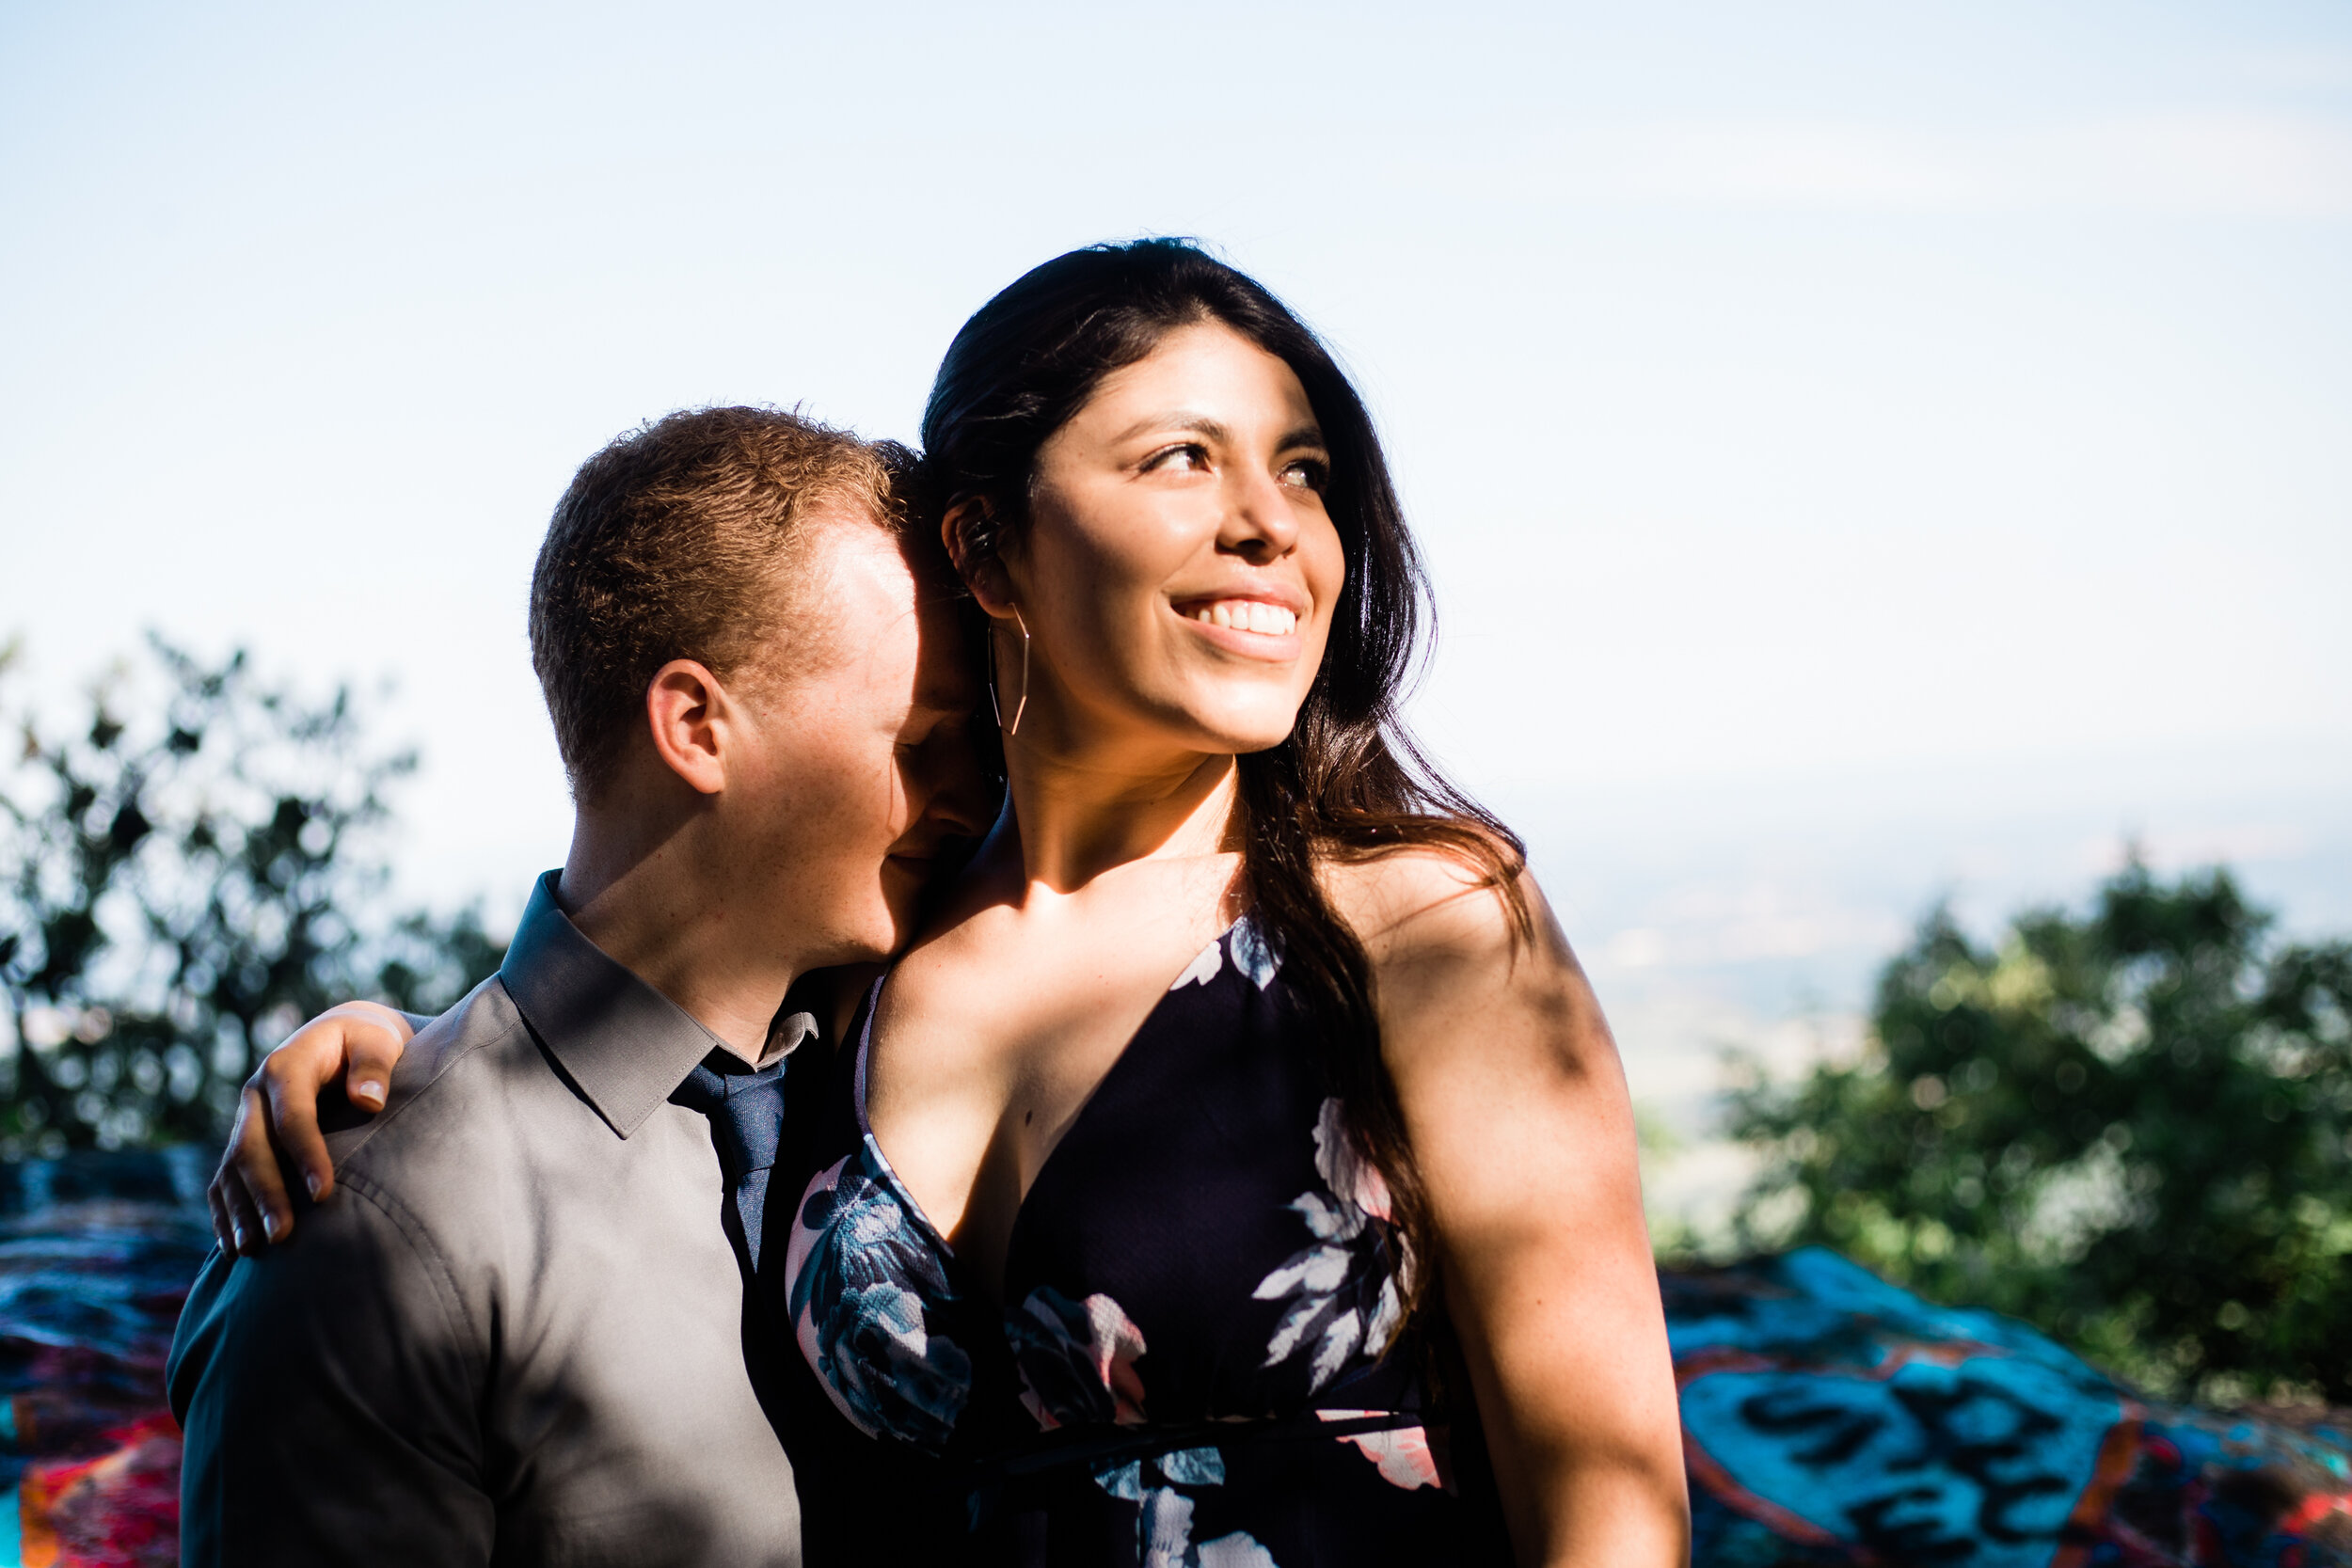 Engagement Session at High Rock Mountain in Western Maryland by Megapixels Media Photography best husband and wife wedding photographers-10.jpg